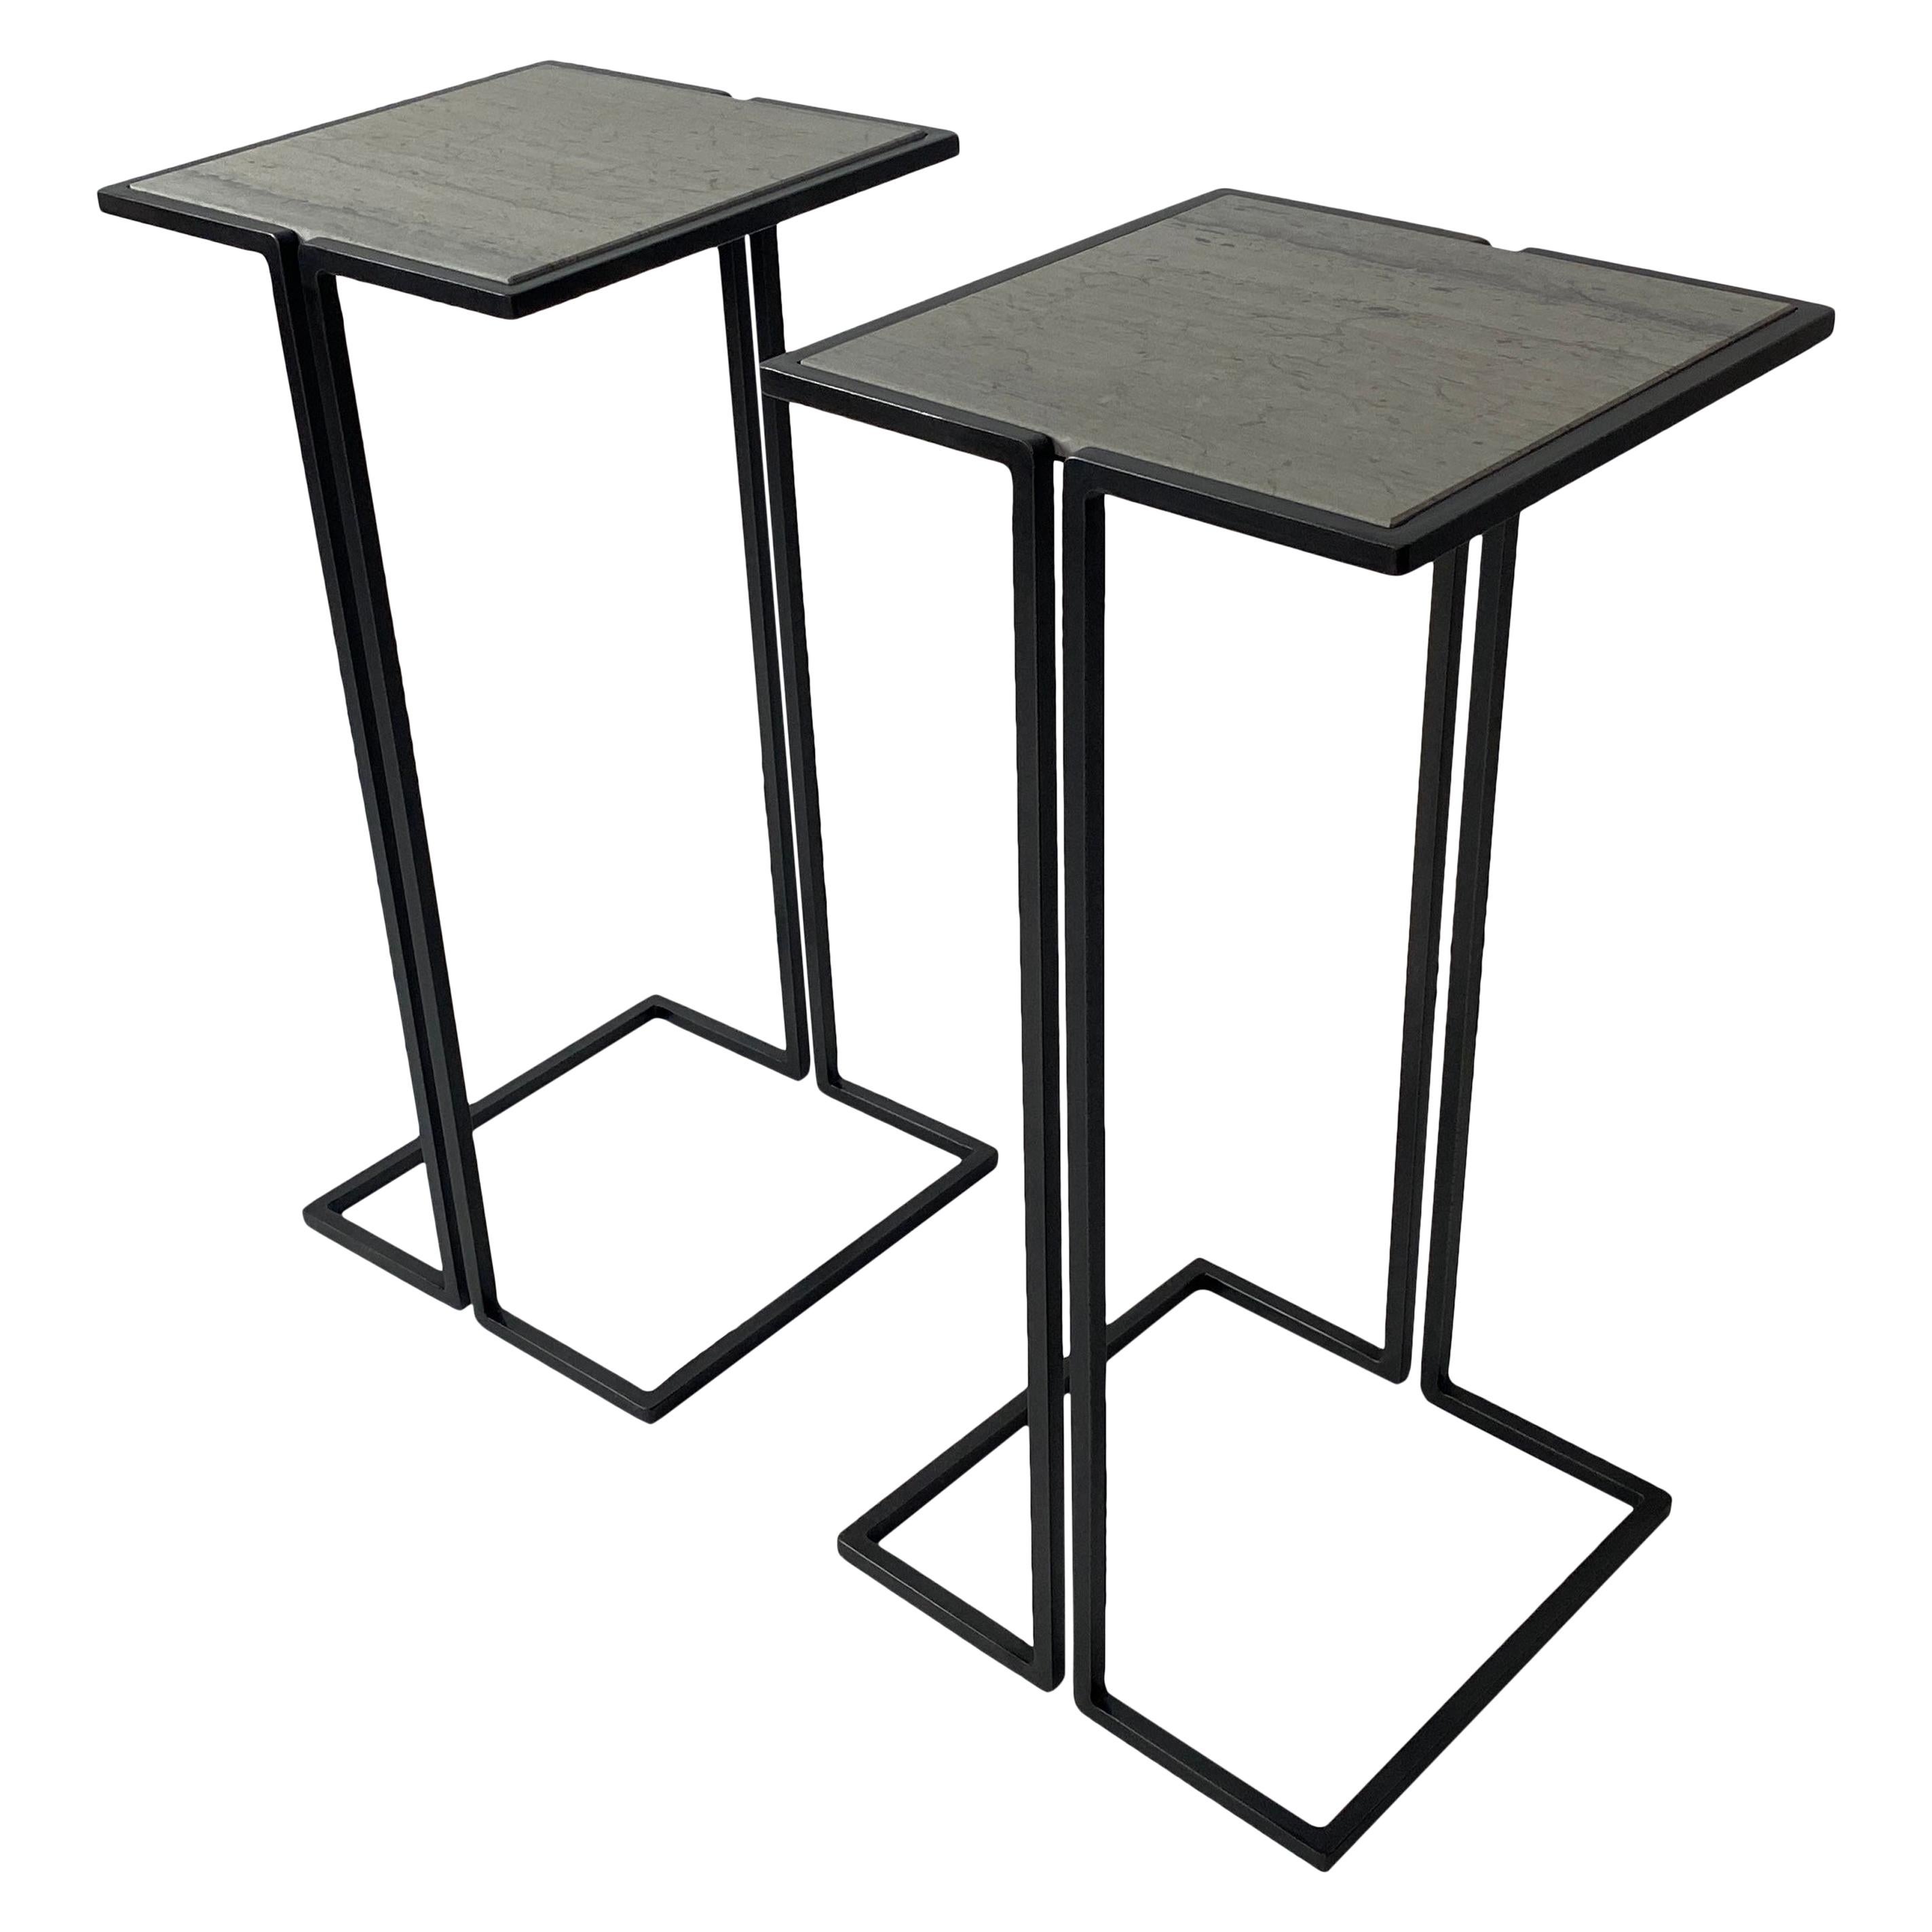 Pair of Nantes Side Tables, by Bourgeois Boheme Atelier 'Model B'